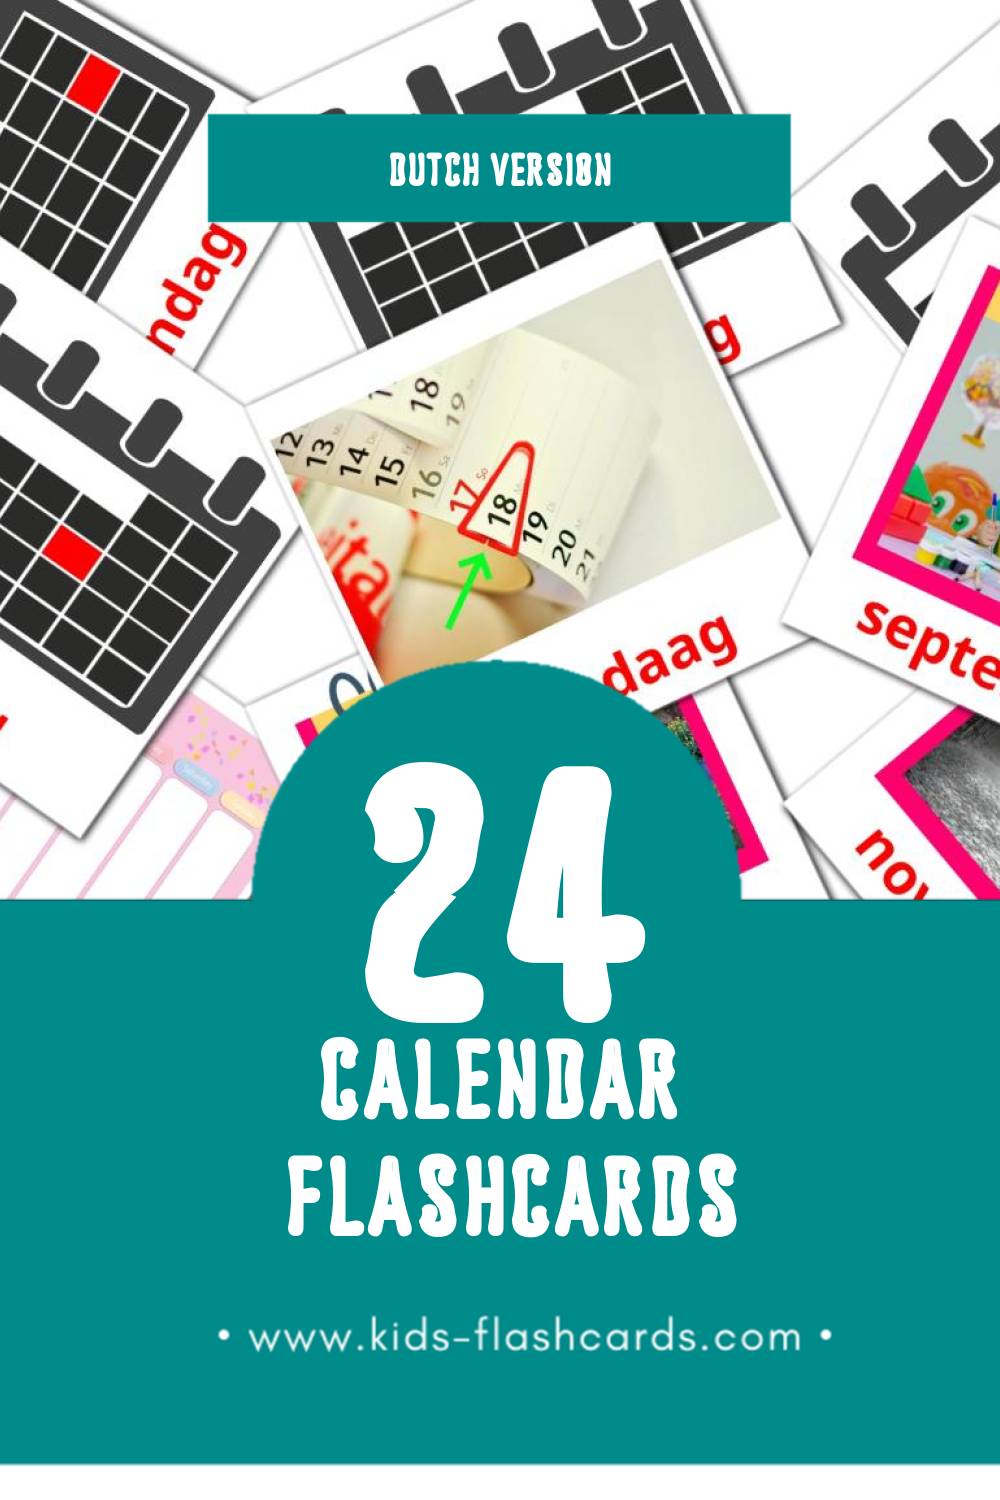 Visual Kalendar Flashcards for Toddlers (24 cards in Dutch)